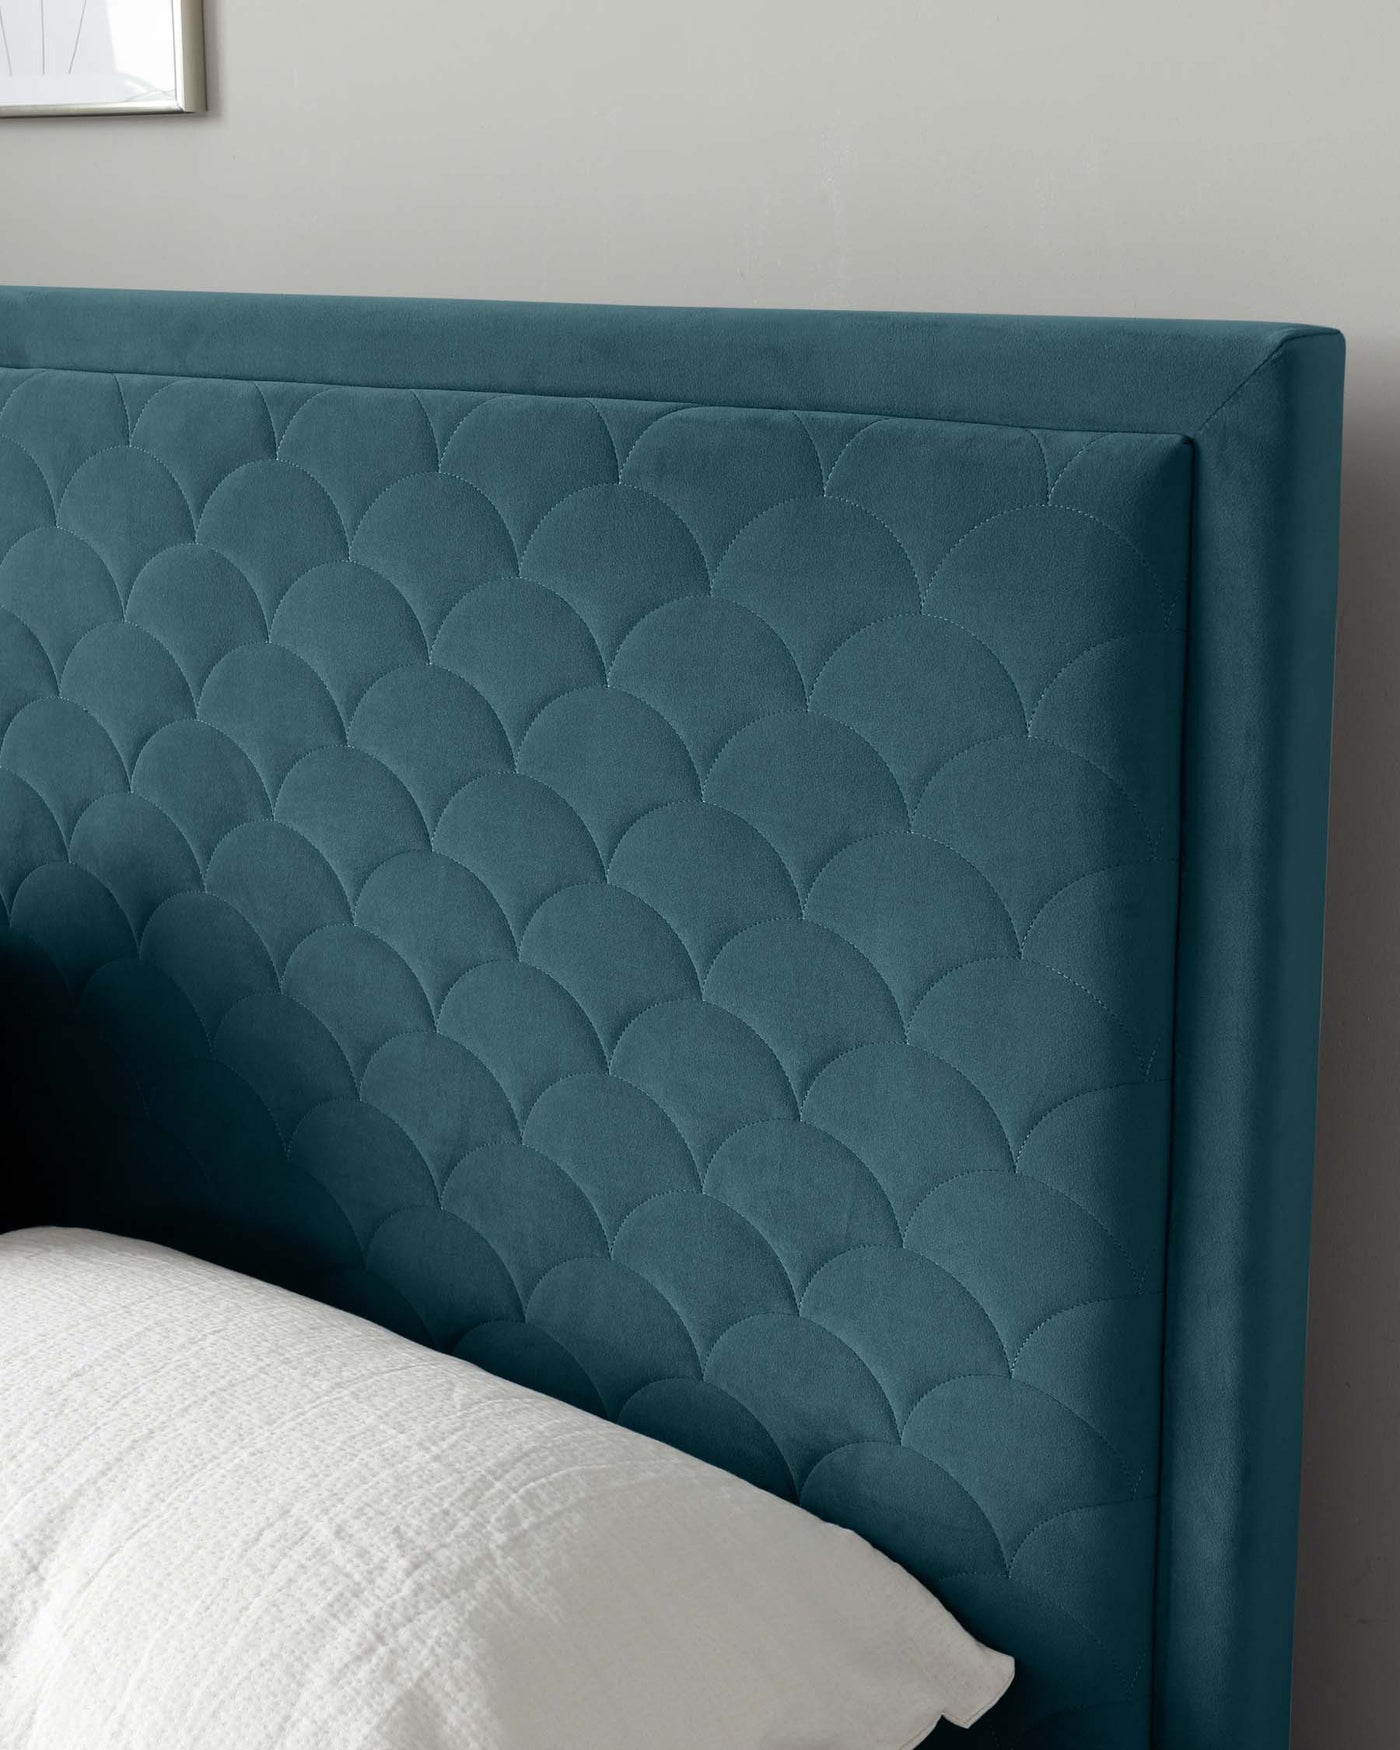 Elegant teal upholstered headboard featuring a scalloped silhouette with deep diamond tufting, paired with a white pillow in a tidy bedroom setting.